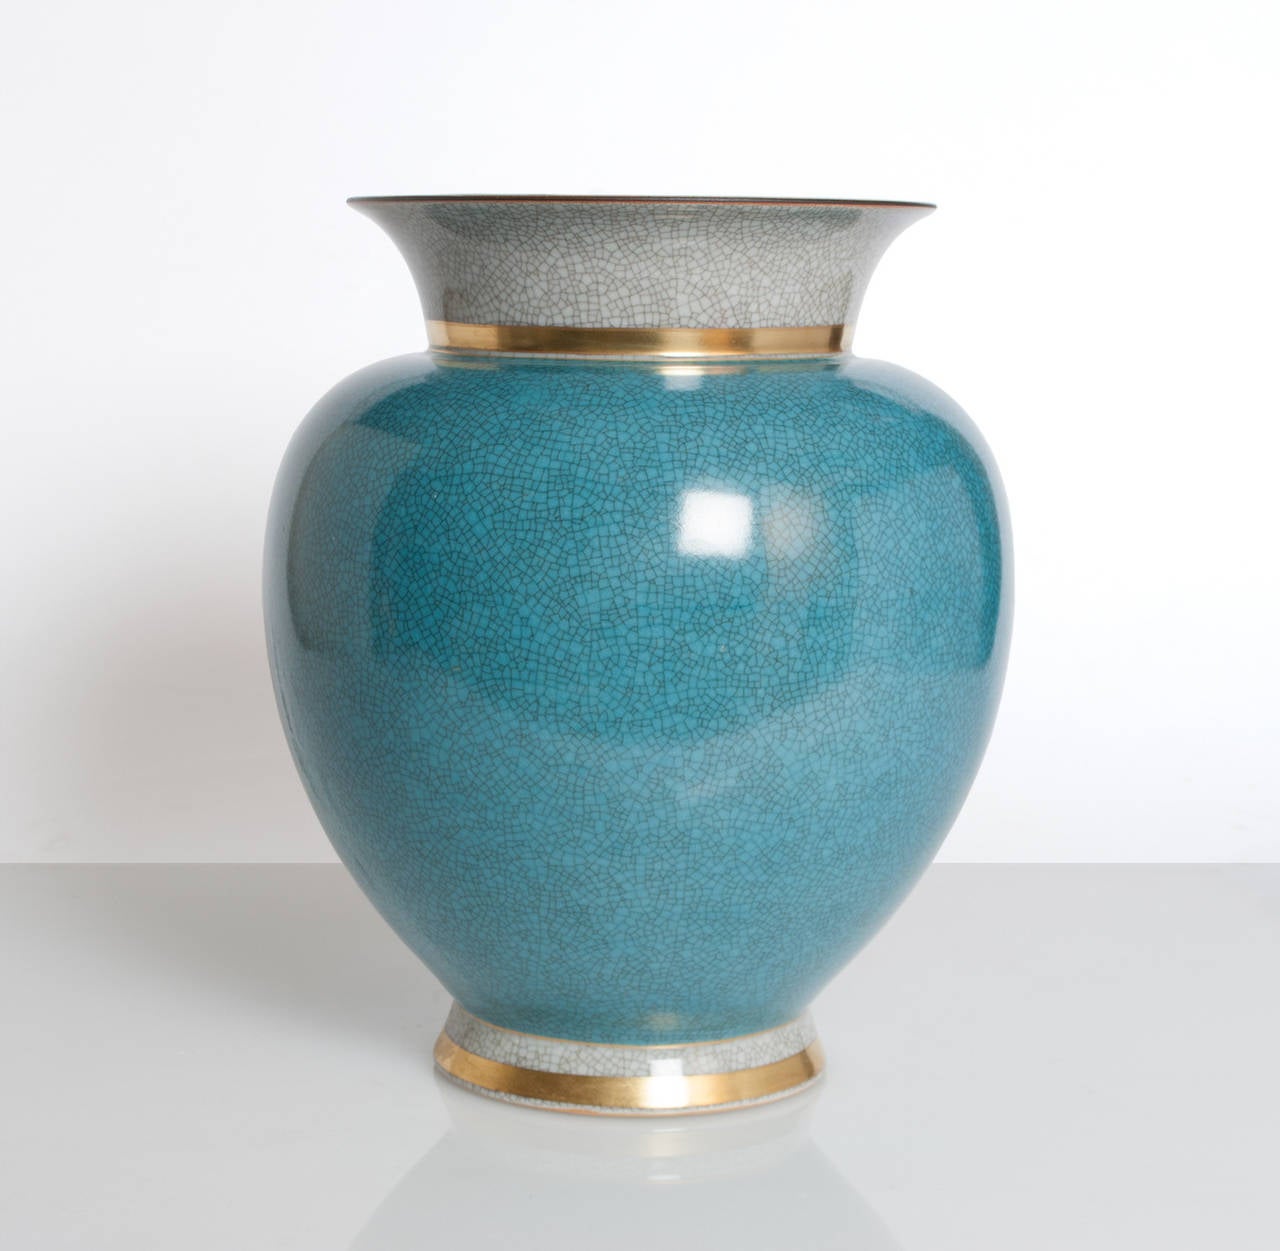 Very large Royal Copenhagen ceramic vase in blue and white (craquelure) crackle glaze and detail in gold. Made in Denmark circa 1940's. 
Height 12